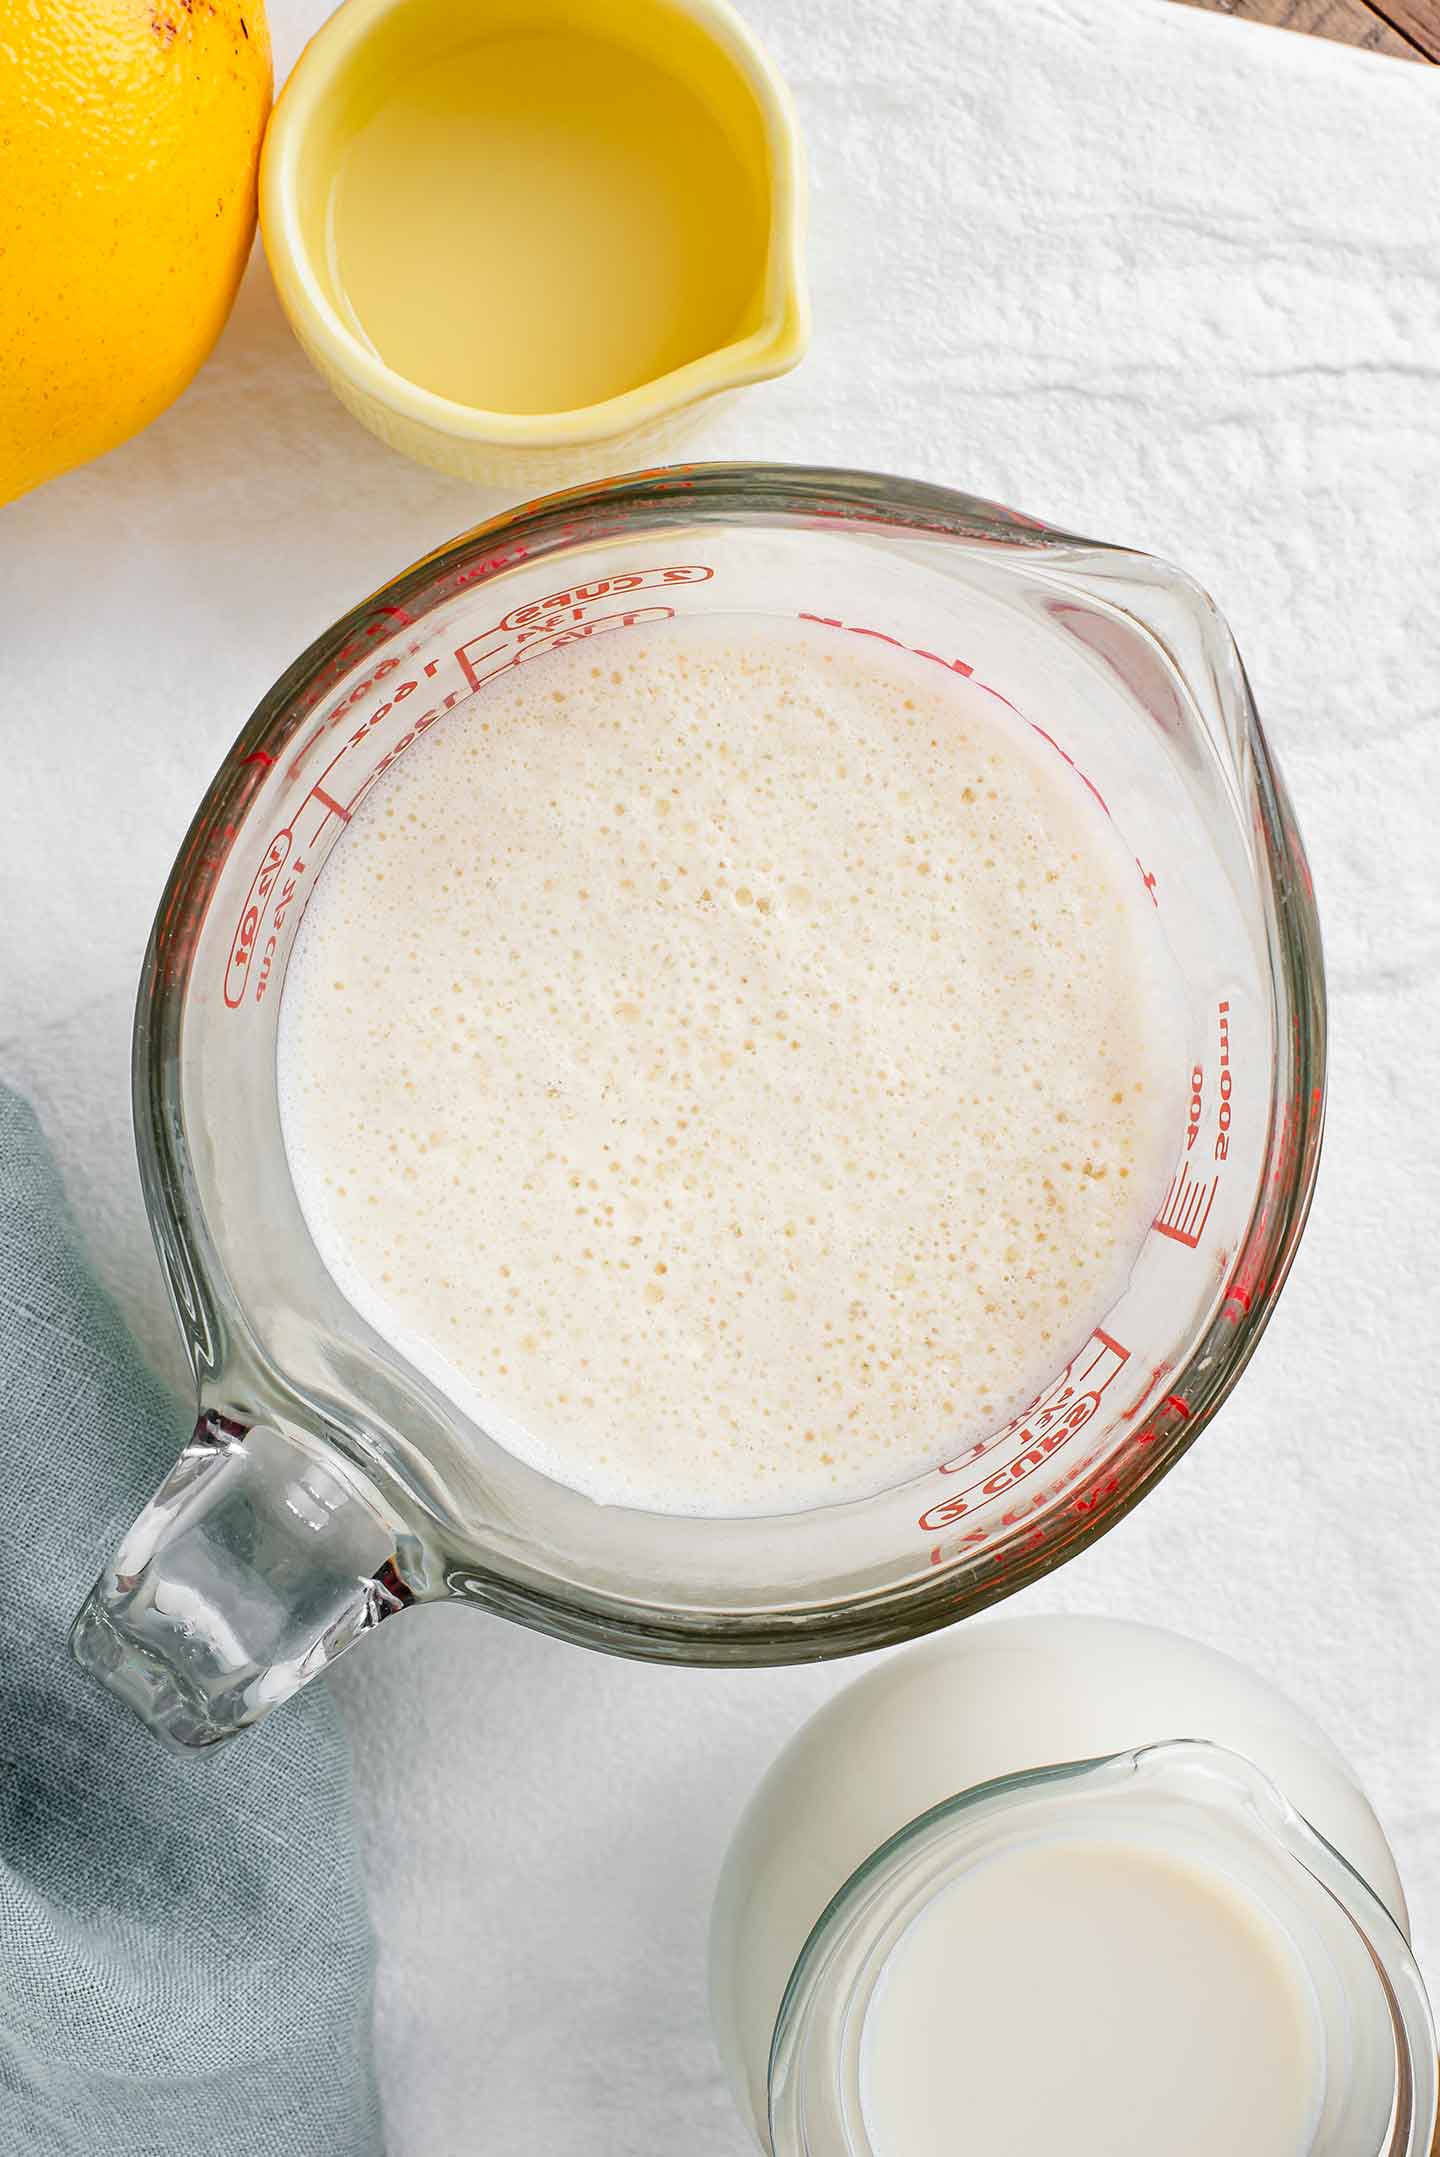 Top down view of homemade vegan buttermilk. Soy milk and lemon juice are combined in a measuring cup to create a thick and soured milk with noticeable clumps.